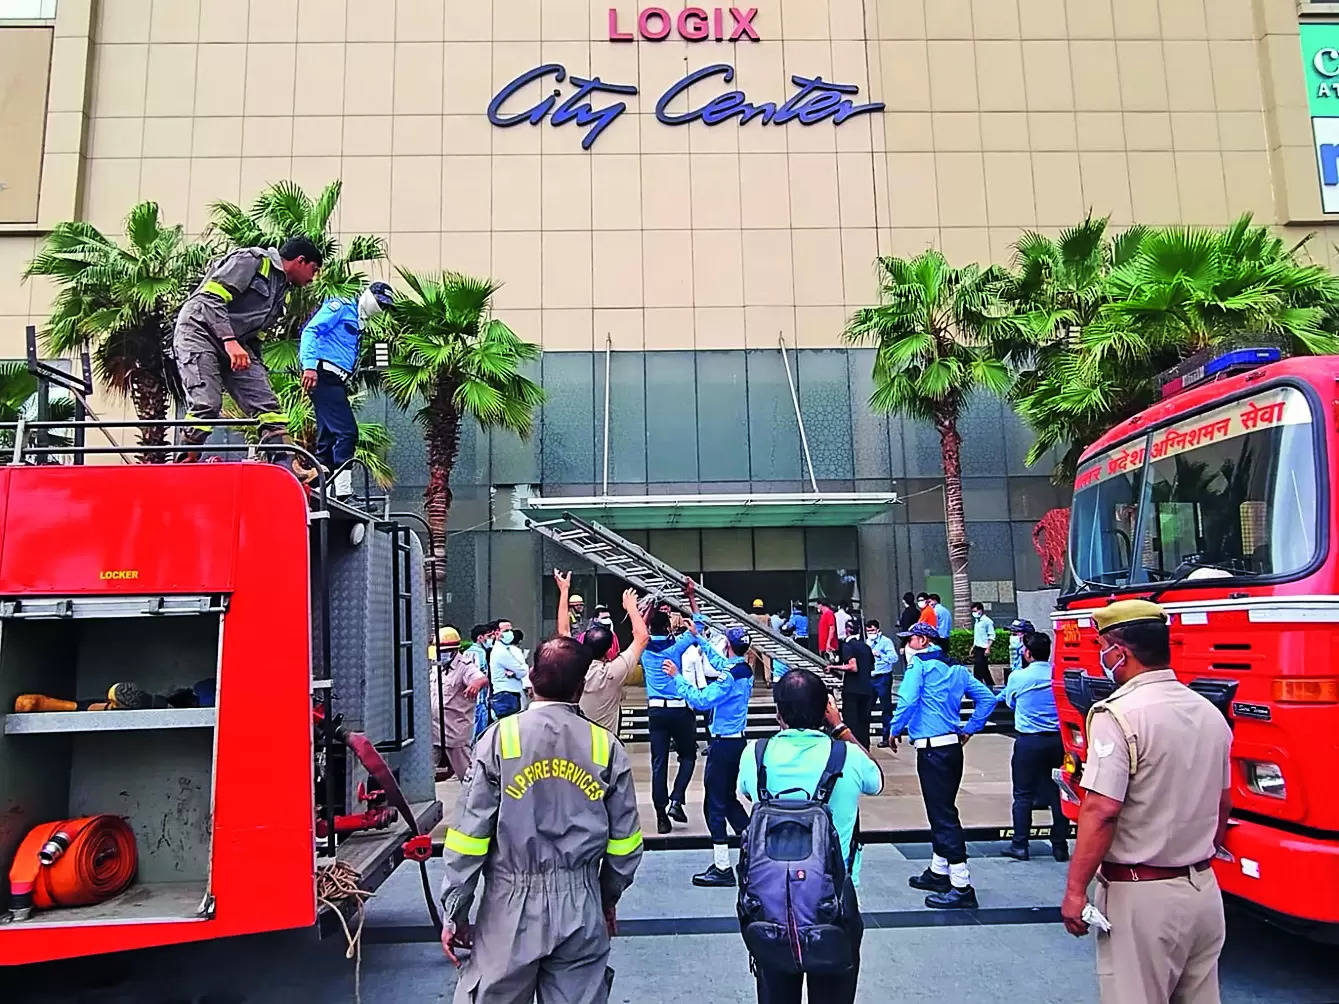 Sparked by short circuit? Fire breaks out at Adidas showroom in Logix mall